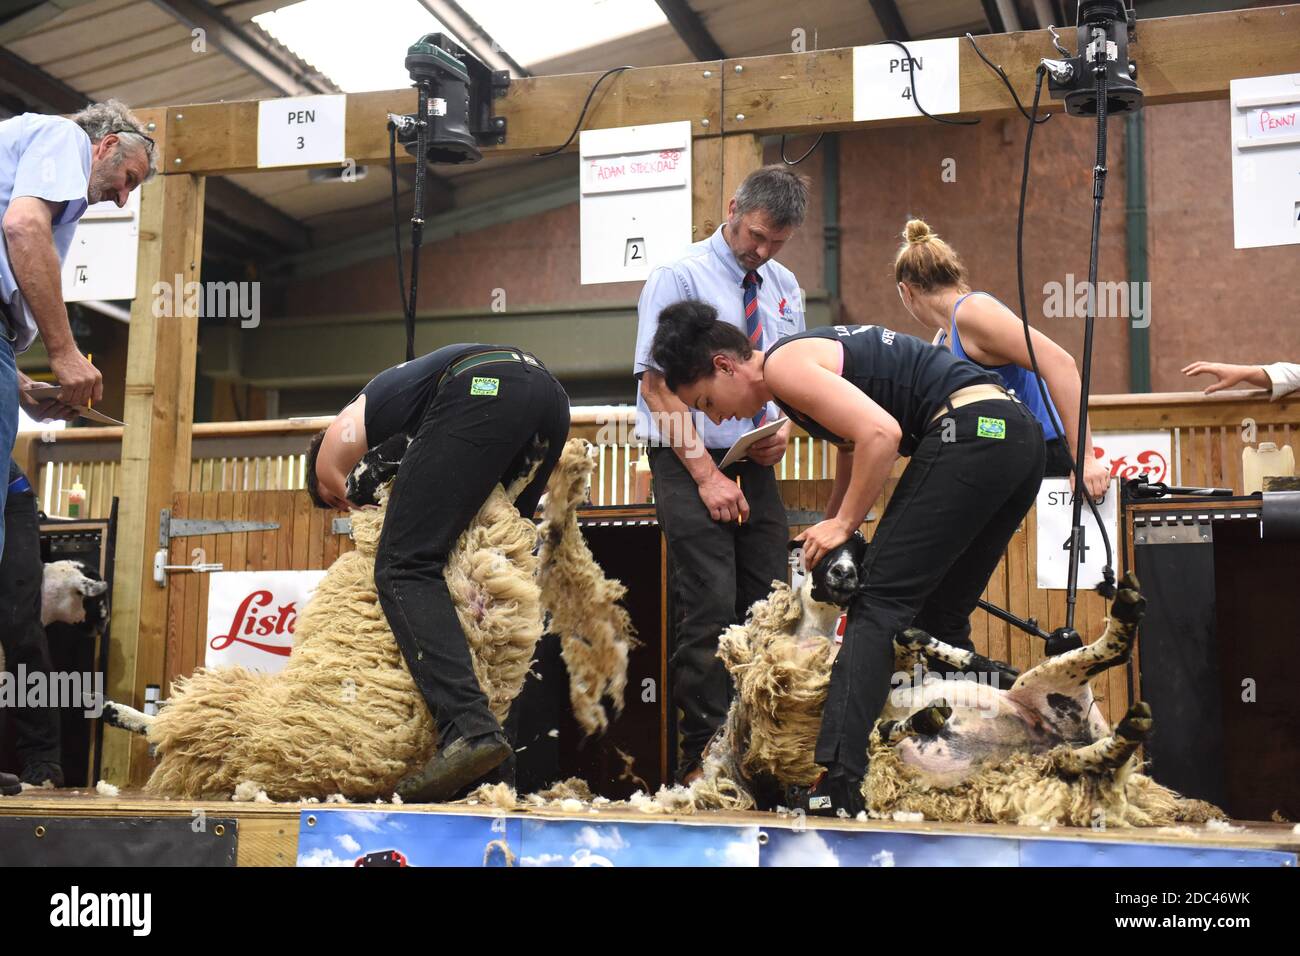 Sheep shearing competition Adam Stockdale & Penny Bell competing at Stafford Show 2018 Stock Photo